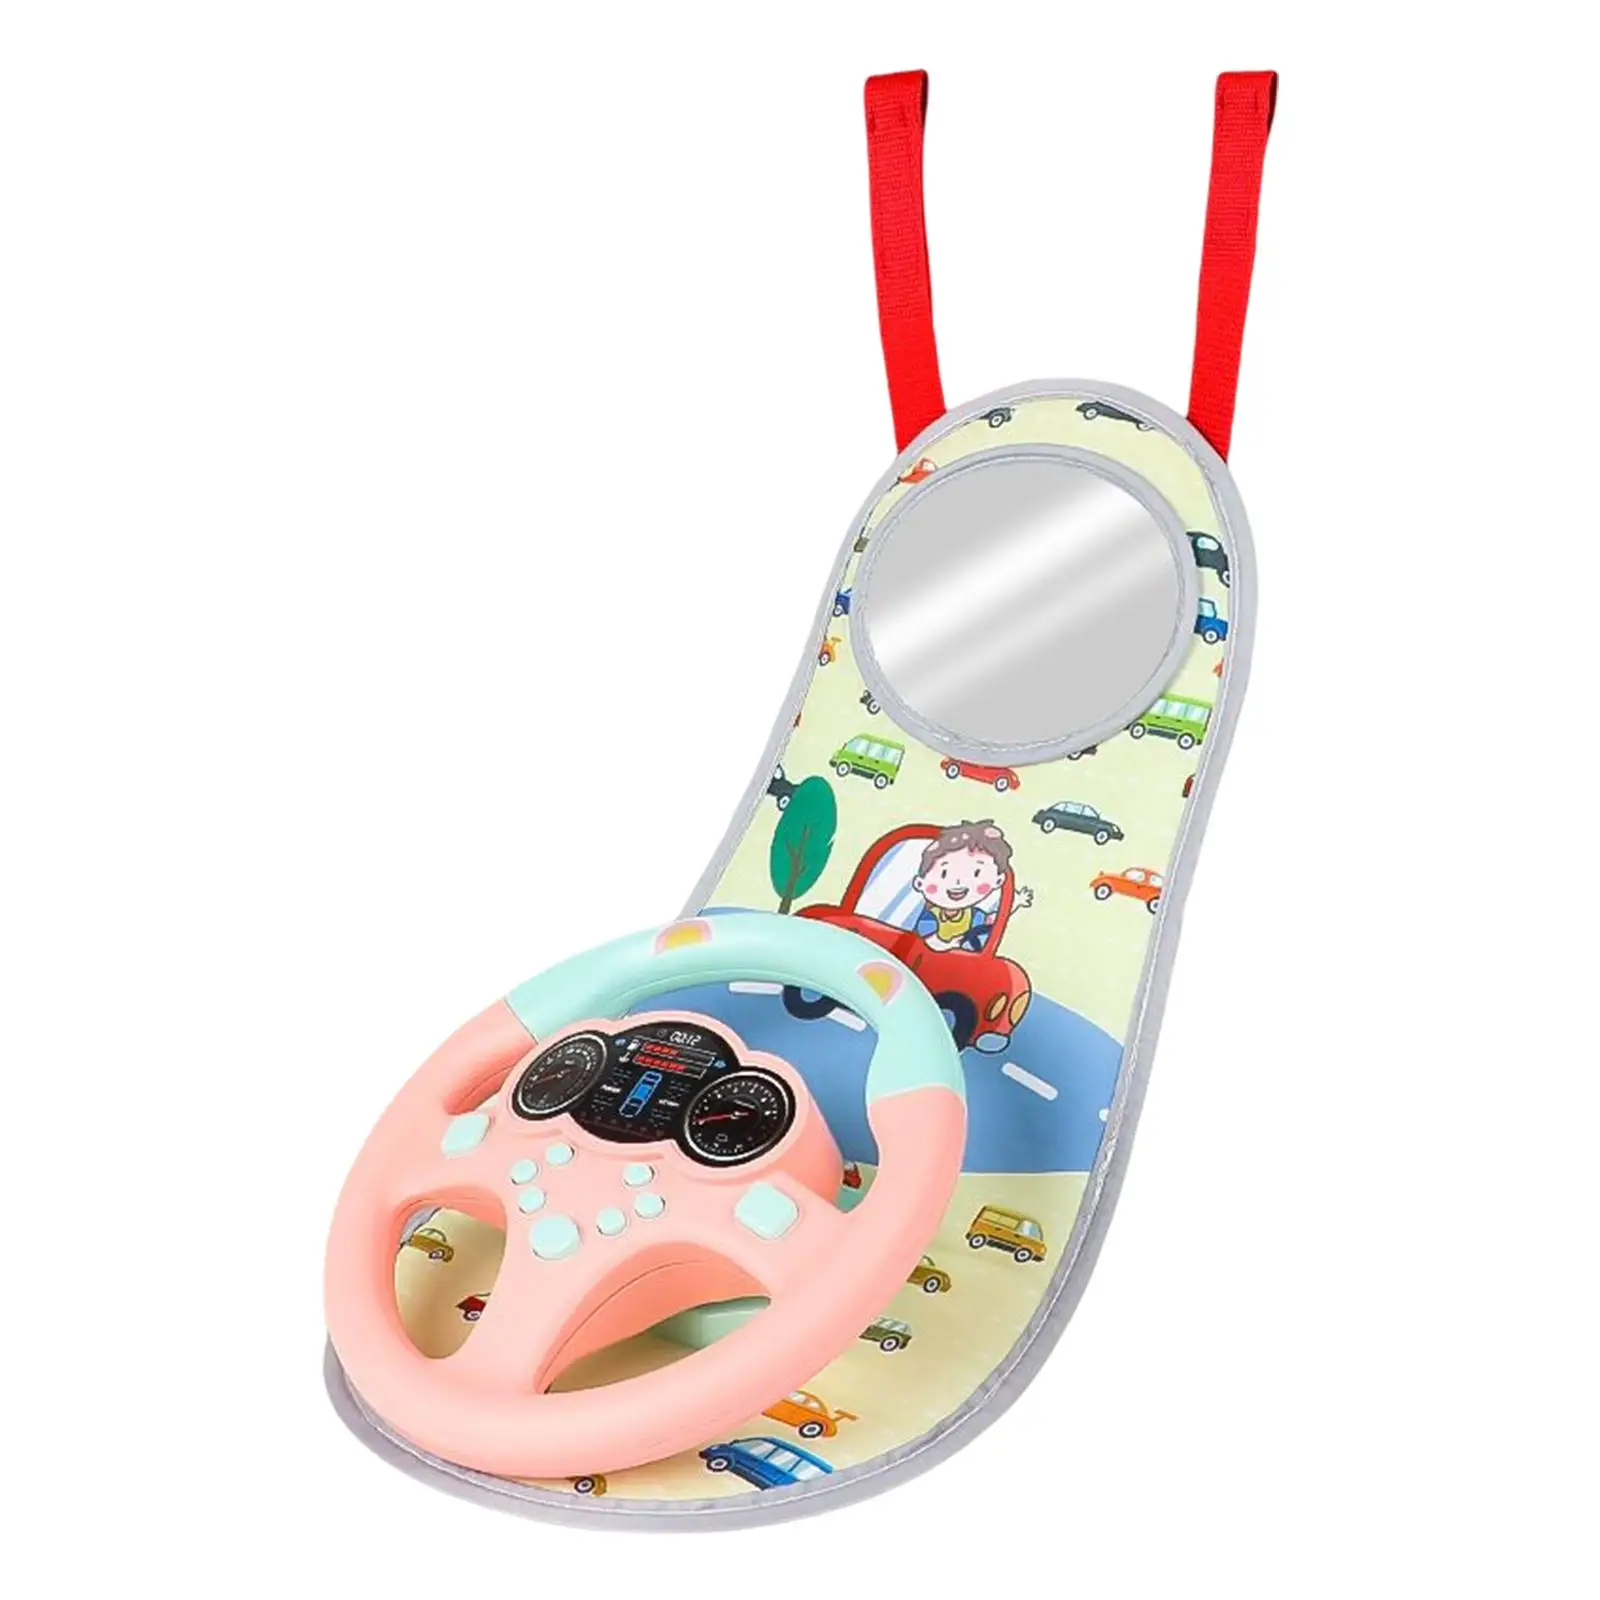 Carseat Toys Steering Wheel Musical Activity Play Center Toy for Toddlers